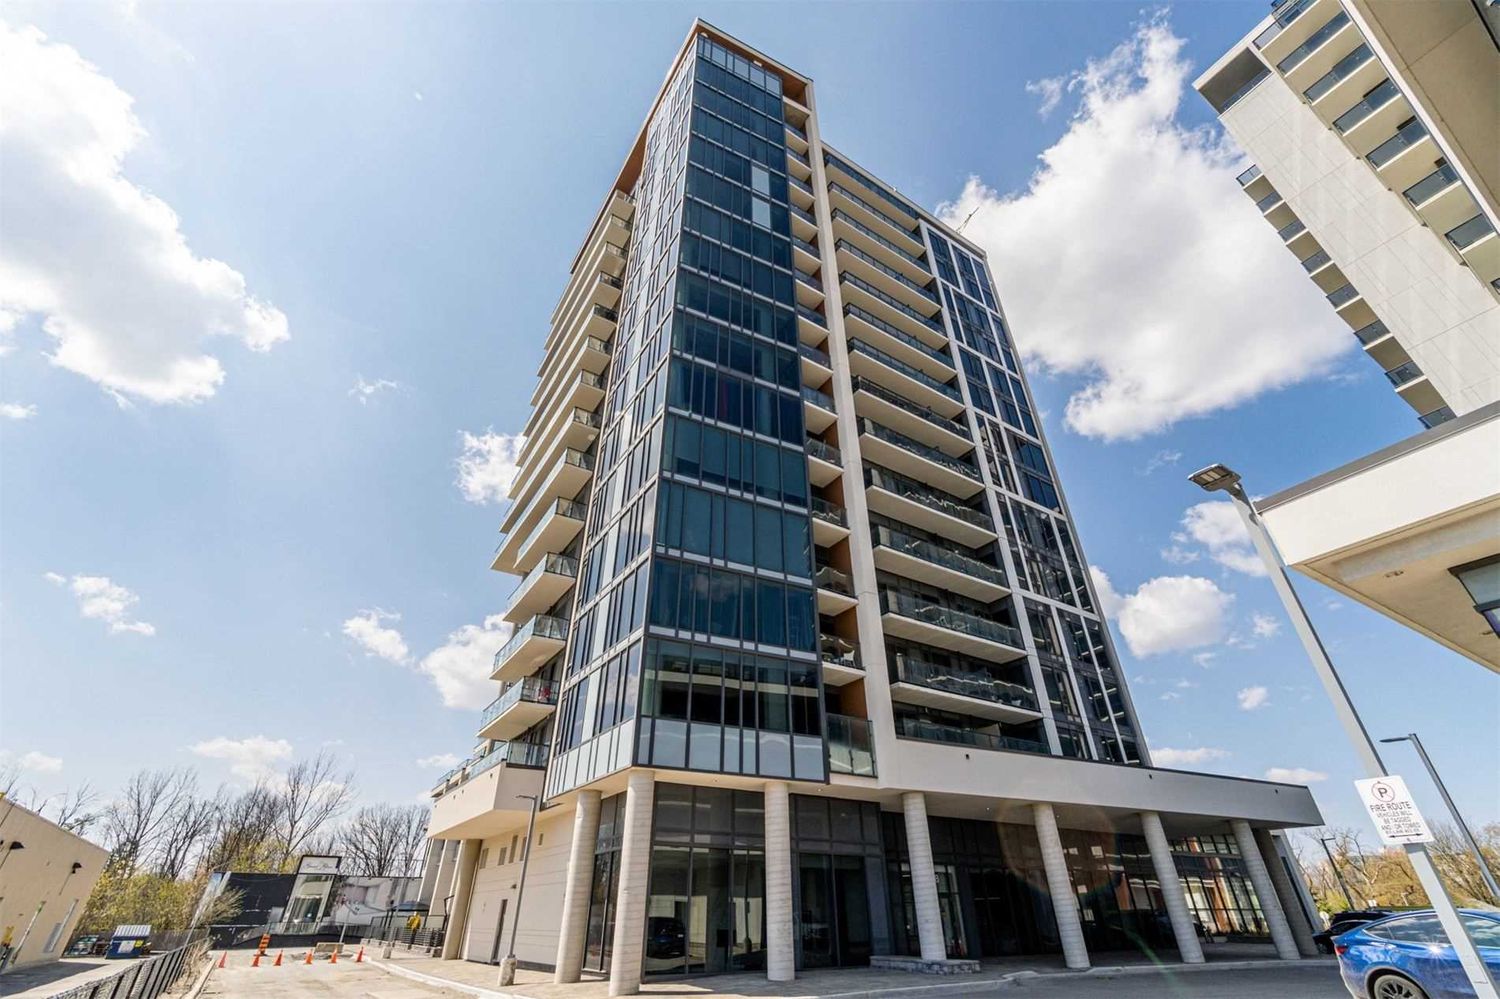 9618 Yonge Street. Grand Palace Condos is located in  Richmond Hill, Toronto - image #2 of 3